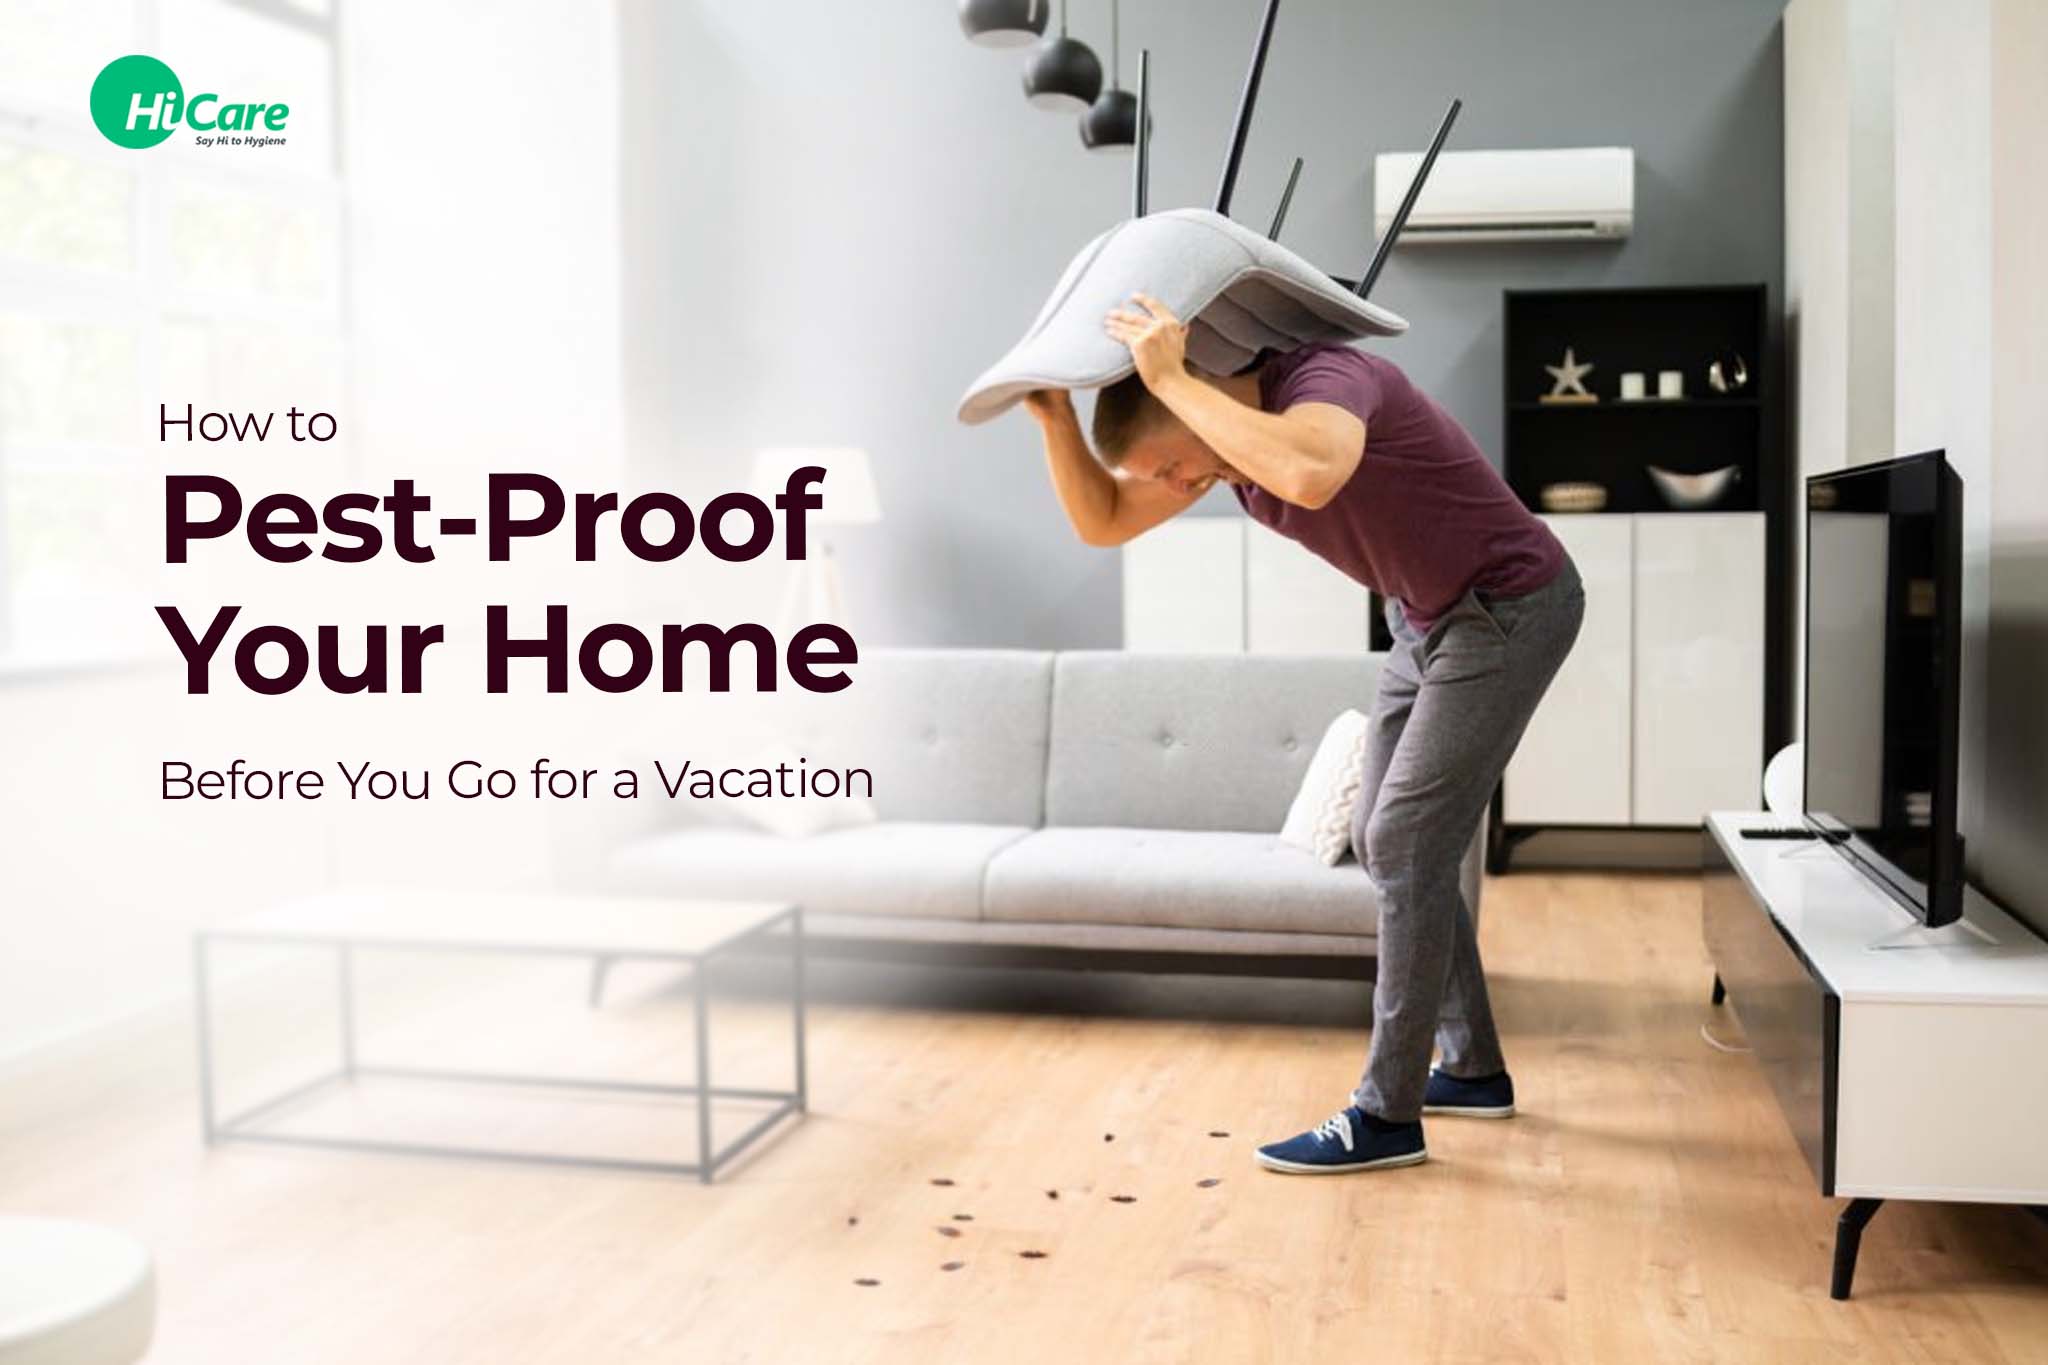 How to Pest-Proof Your Home Before You Go for a Vacation